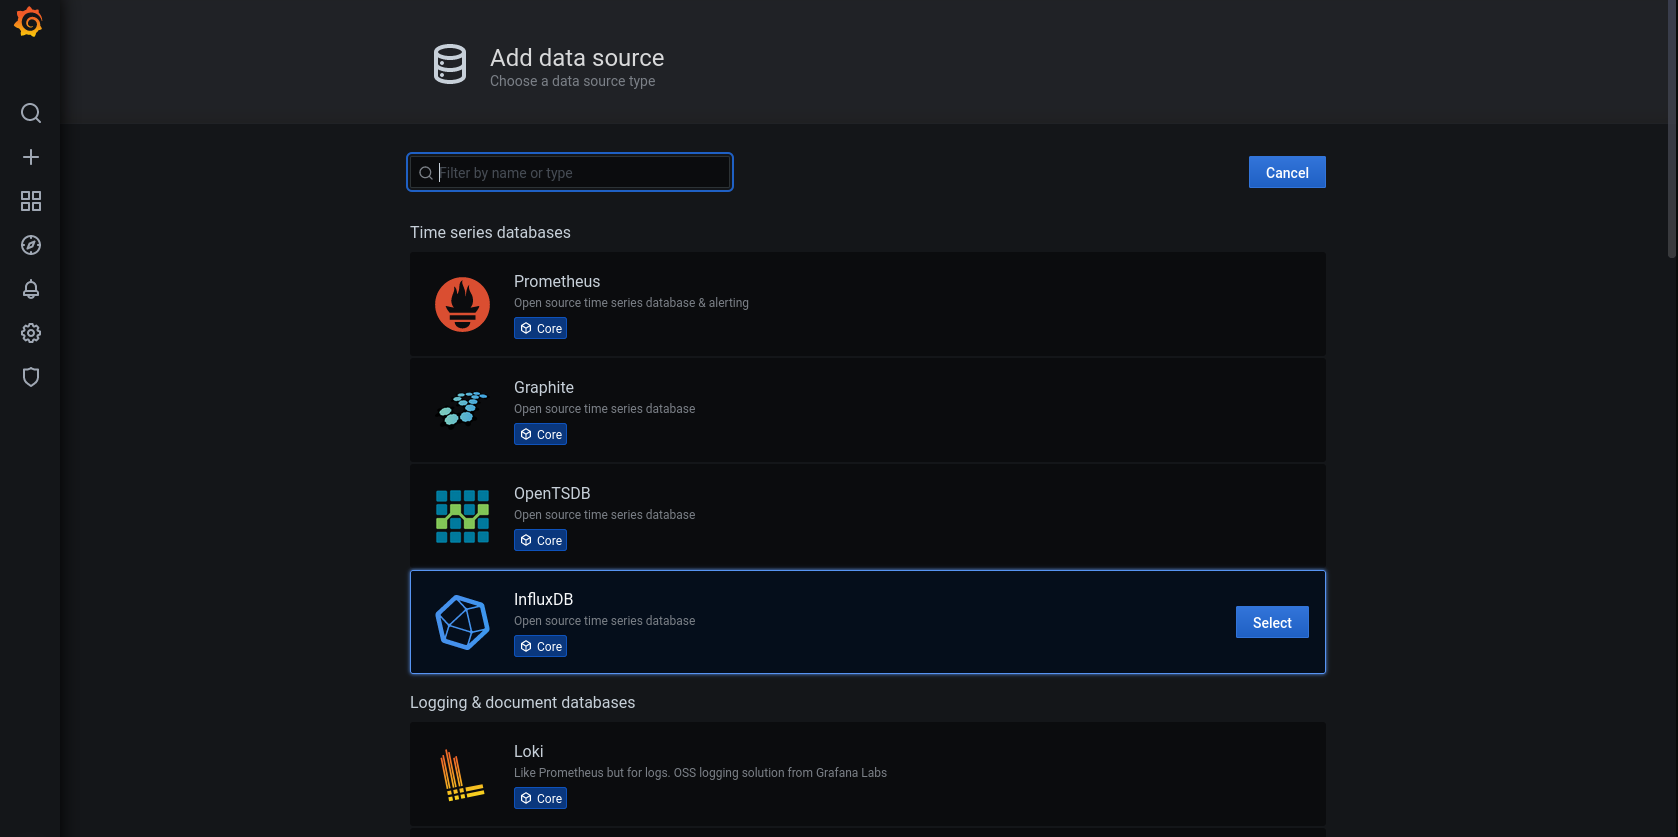 An screenshot of the Grafana web interface. The data source dialog is opened, and the InfluxDB entry is selected.